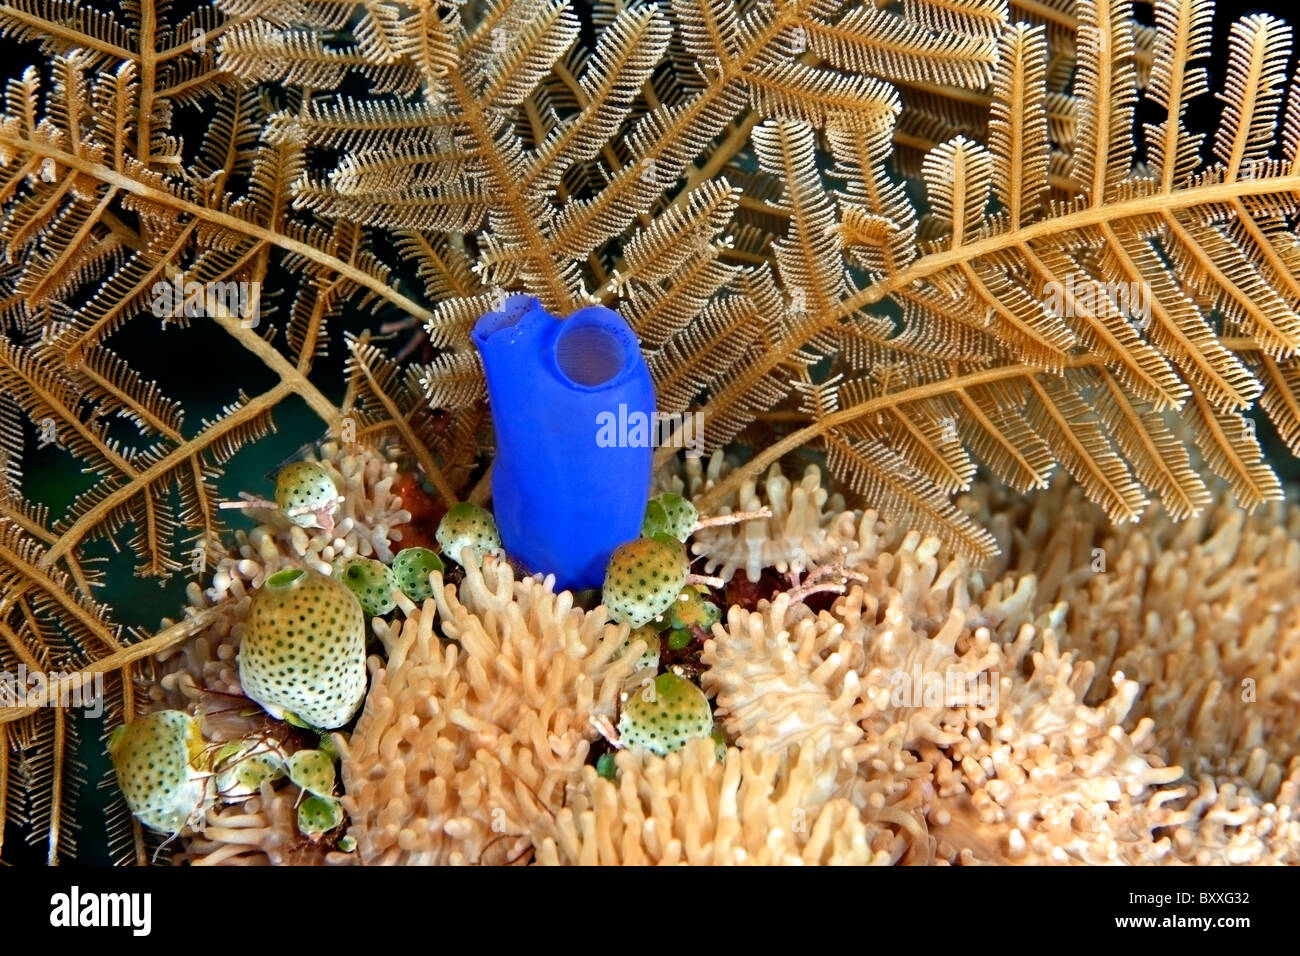 Blue ascidian, or tunicate, Rhopalaea and a cluster of small green and white ascidians, Atriolum robustum. Stock Photo